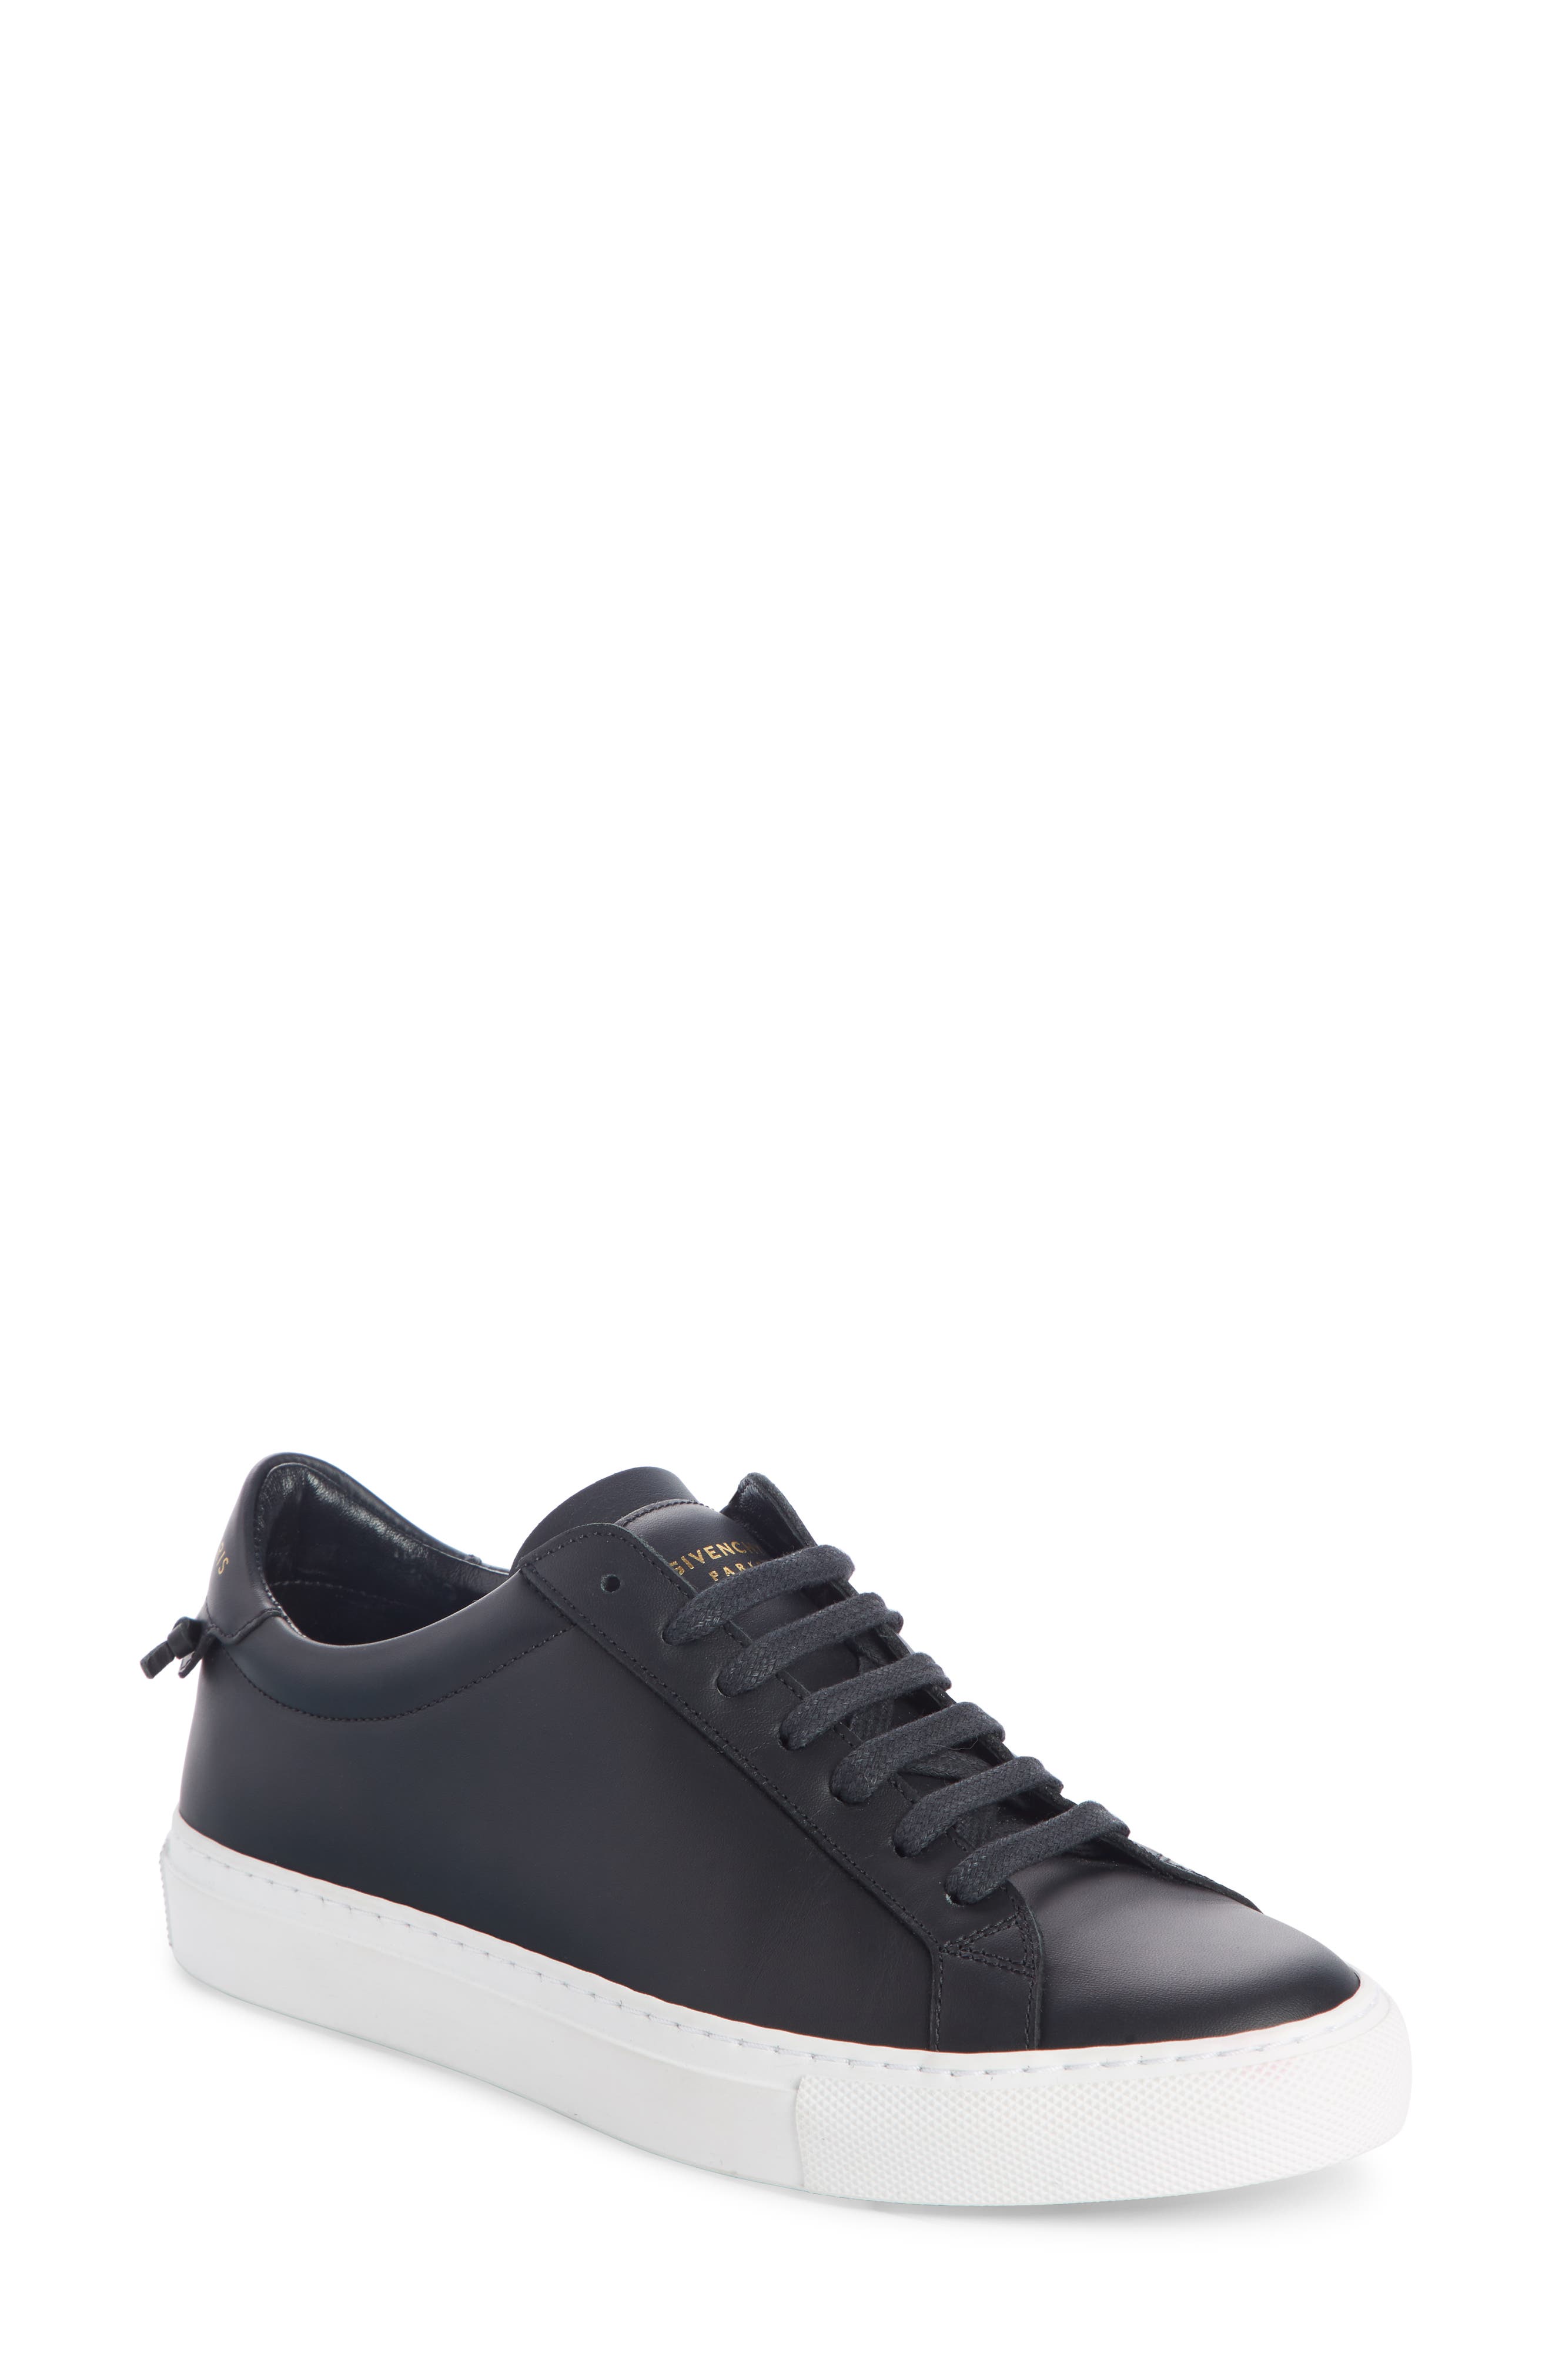 Givenchy Urban Street Low Top Sneaker 